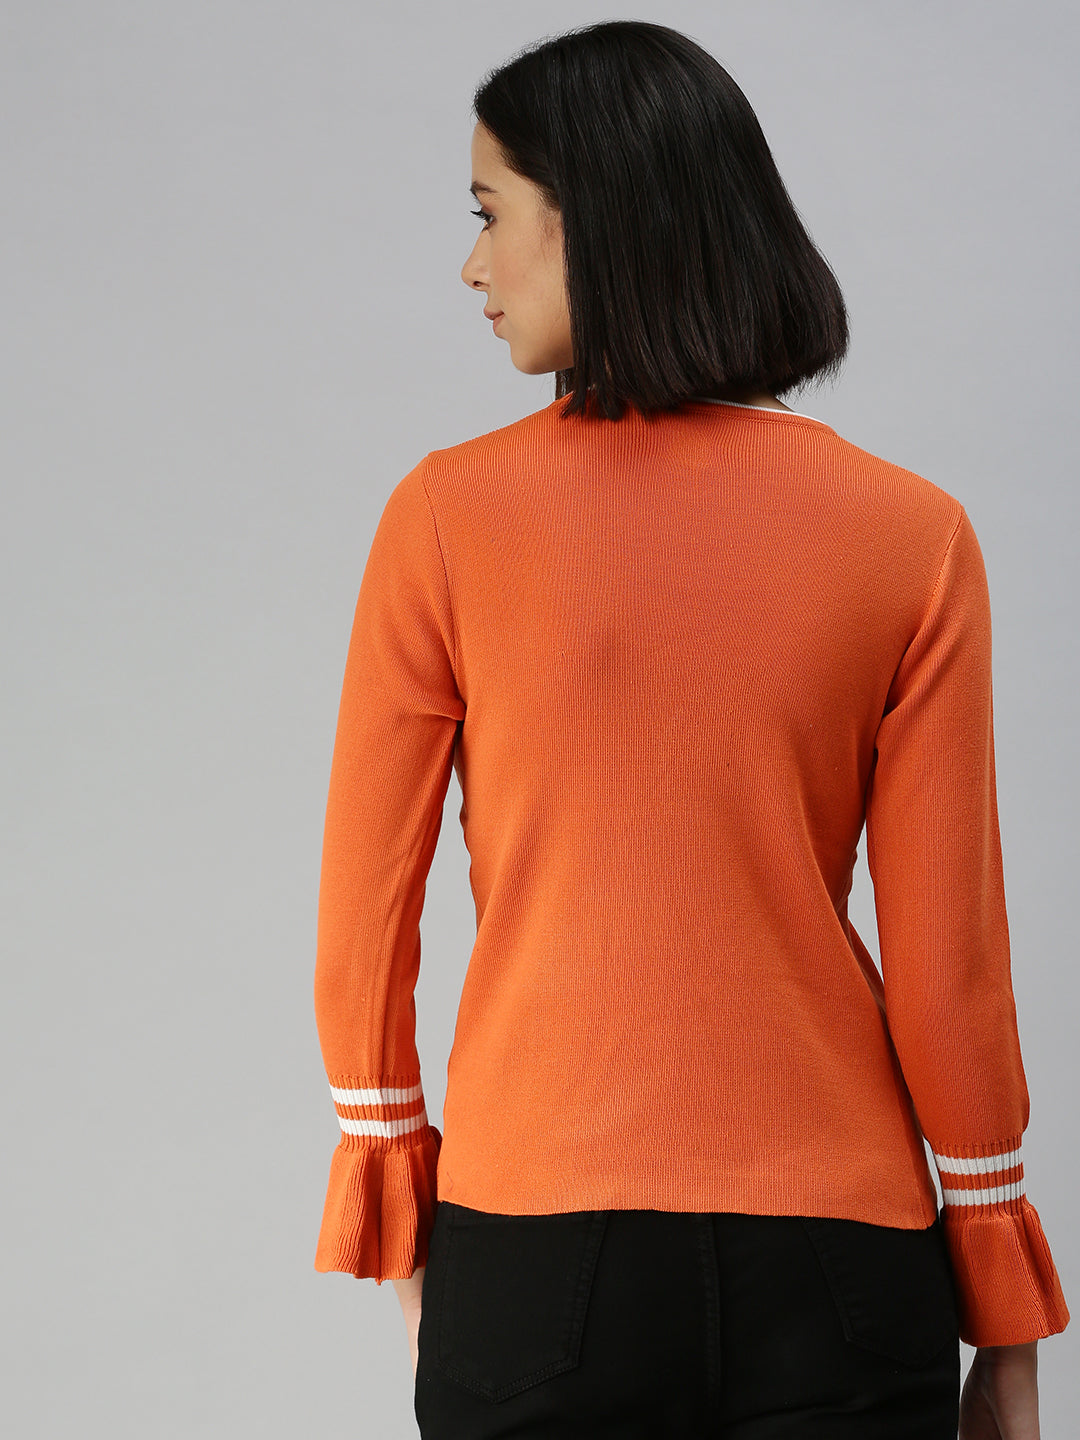 Women Solid Orange Fitted Top